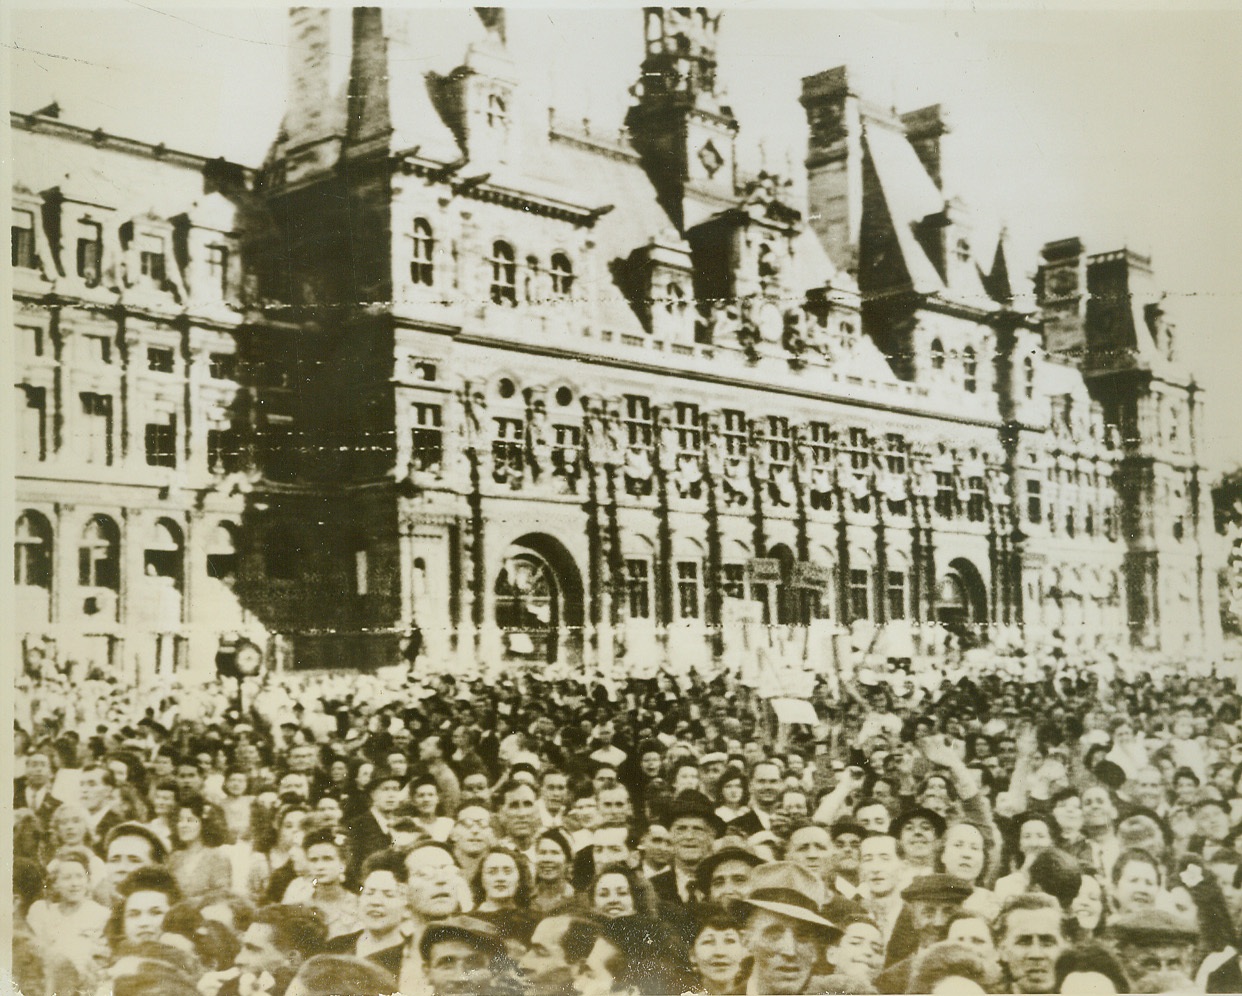 Celebrants Mass in Paris Streets, 8/28/1944. Paris—With faces reflecting the joy of being free once more, Parisians mass in front of the Hotel de Ville in Paris to celebrate the liberation of their city. Shortly afterward, as their voices raised in triumphant cheers for Gen. de Gaulle, shots rang out over their exuberant voices as snipers preyed on the assembly. The General, leading a triumphal procession, narrowly escaped death or injury.  Credit: Signal Corps radiotelephoto from ACME;